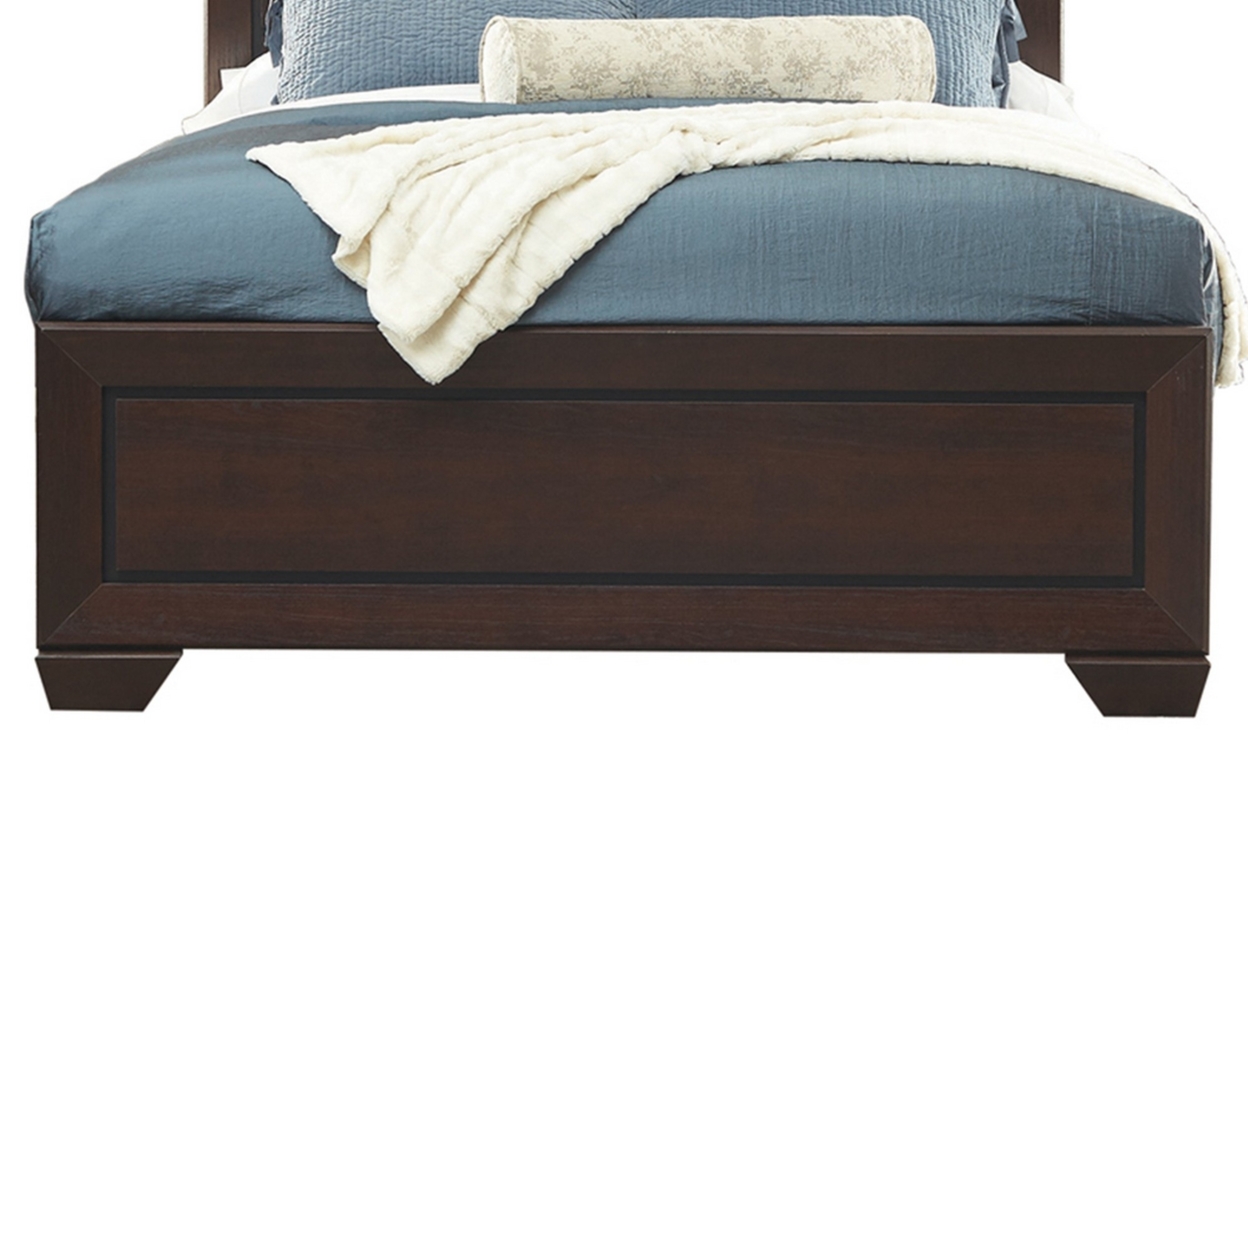 Panel Design Eastern King Bed With Contrasting Recessed Grooves, Dark Brown- Saltoro Sherpi